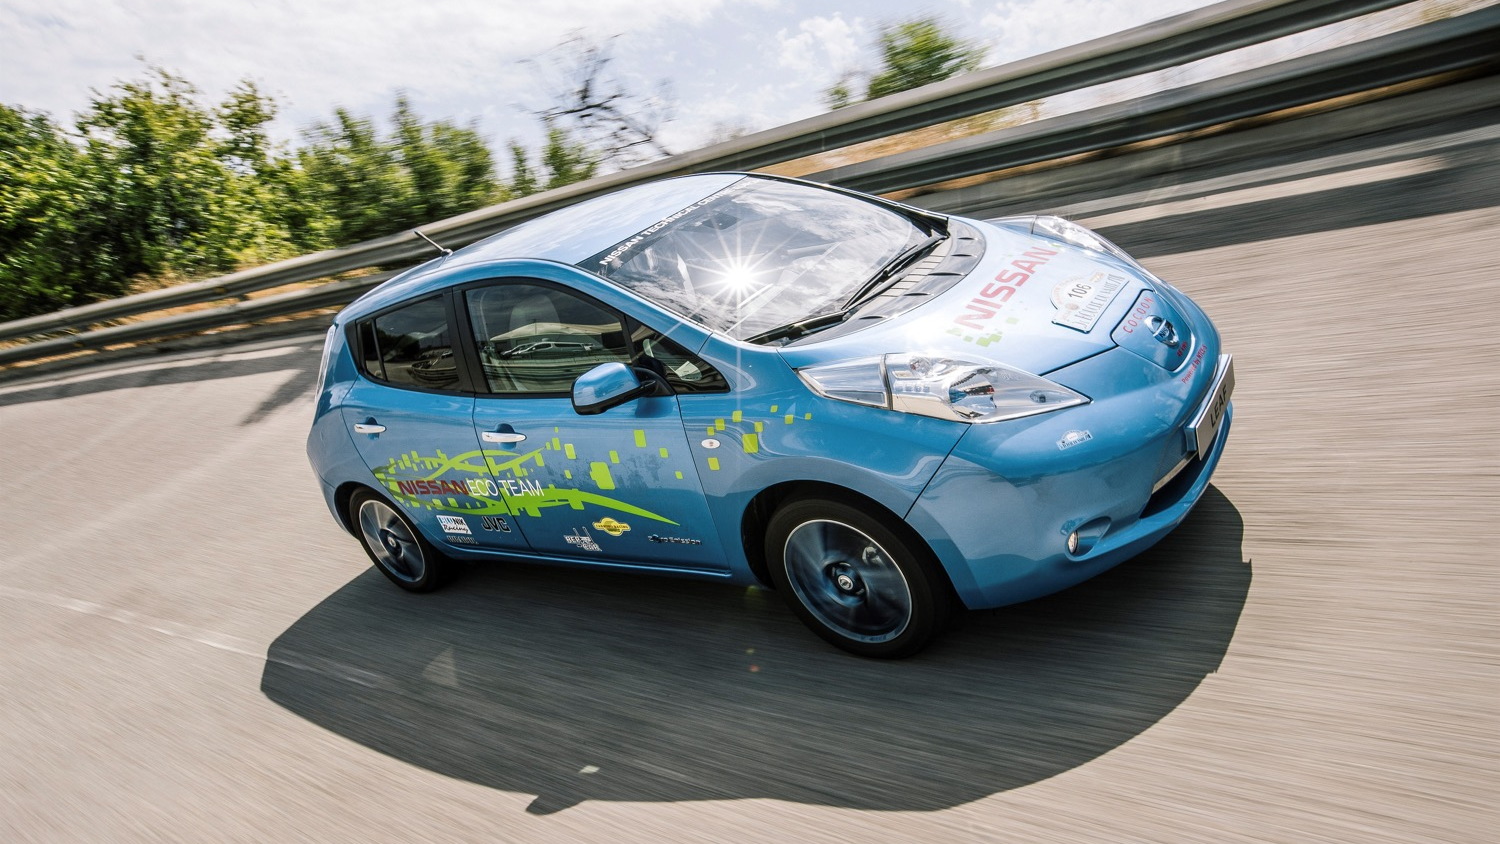 Nissan Leaf 48-kWh prototype built by employees